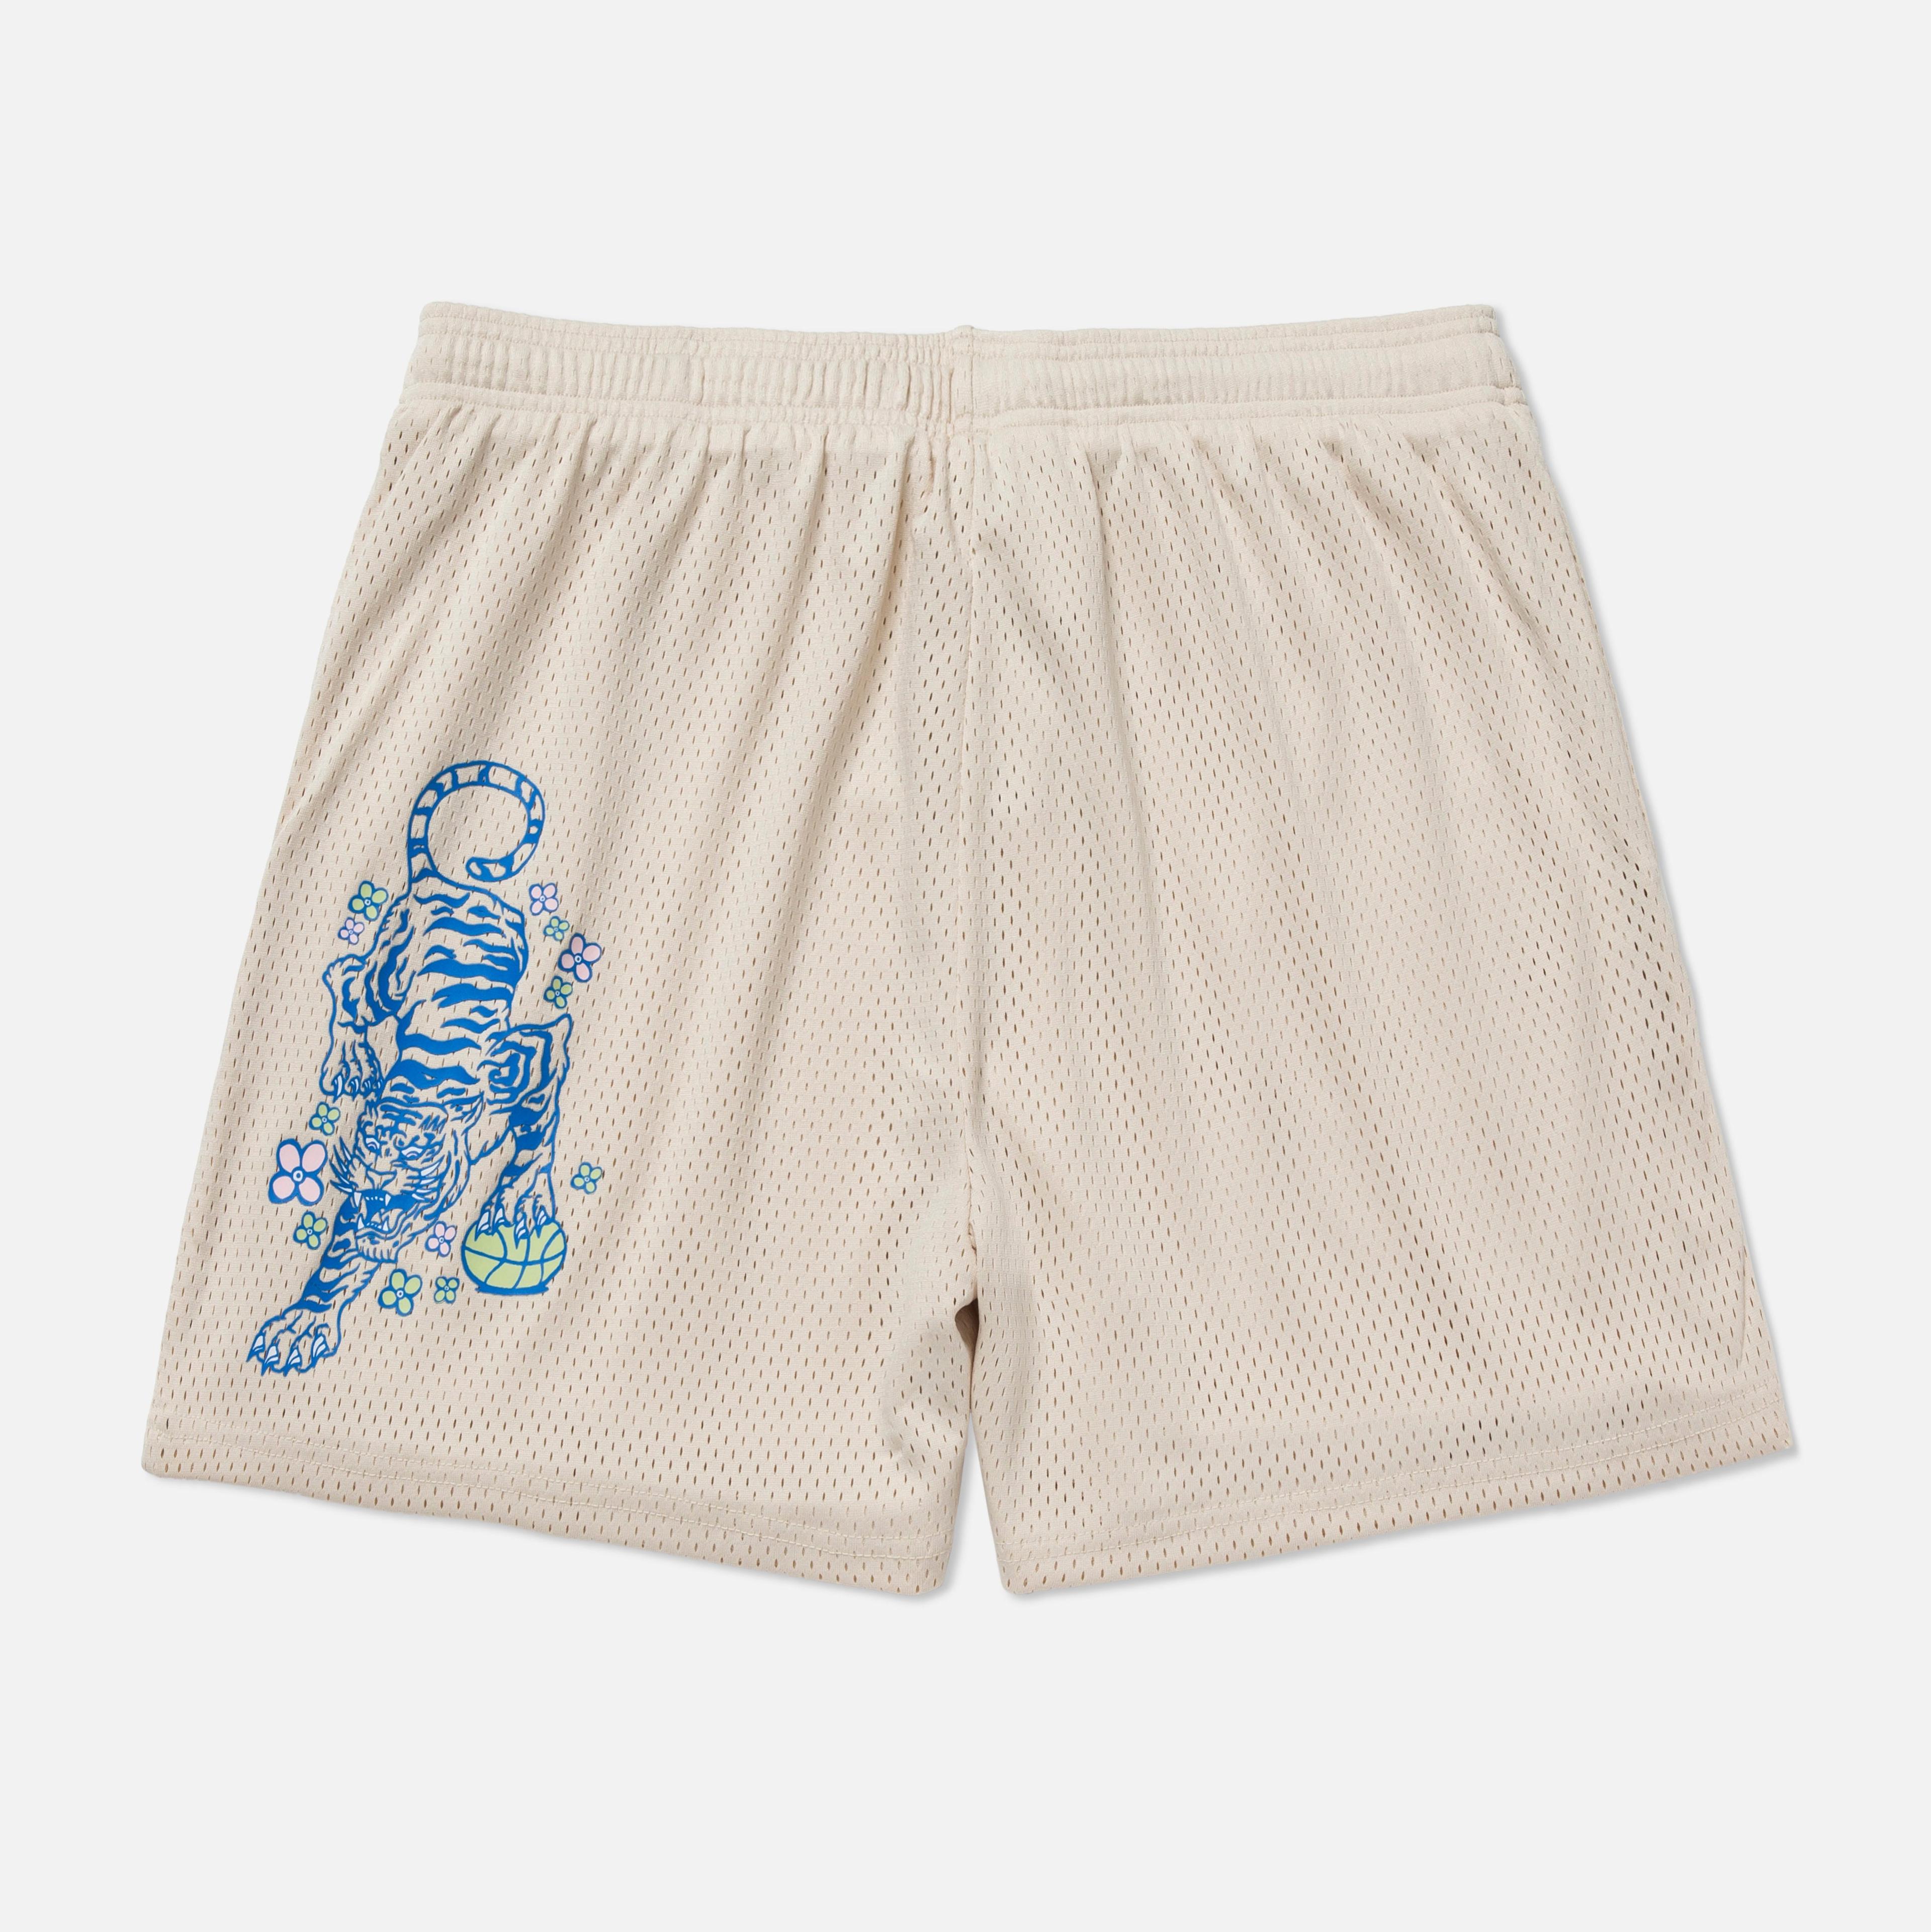 Alternate View 1 of Paradise Tiger Shorts